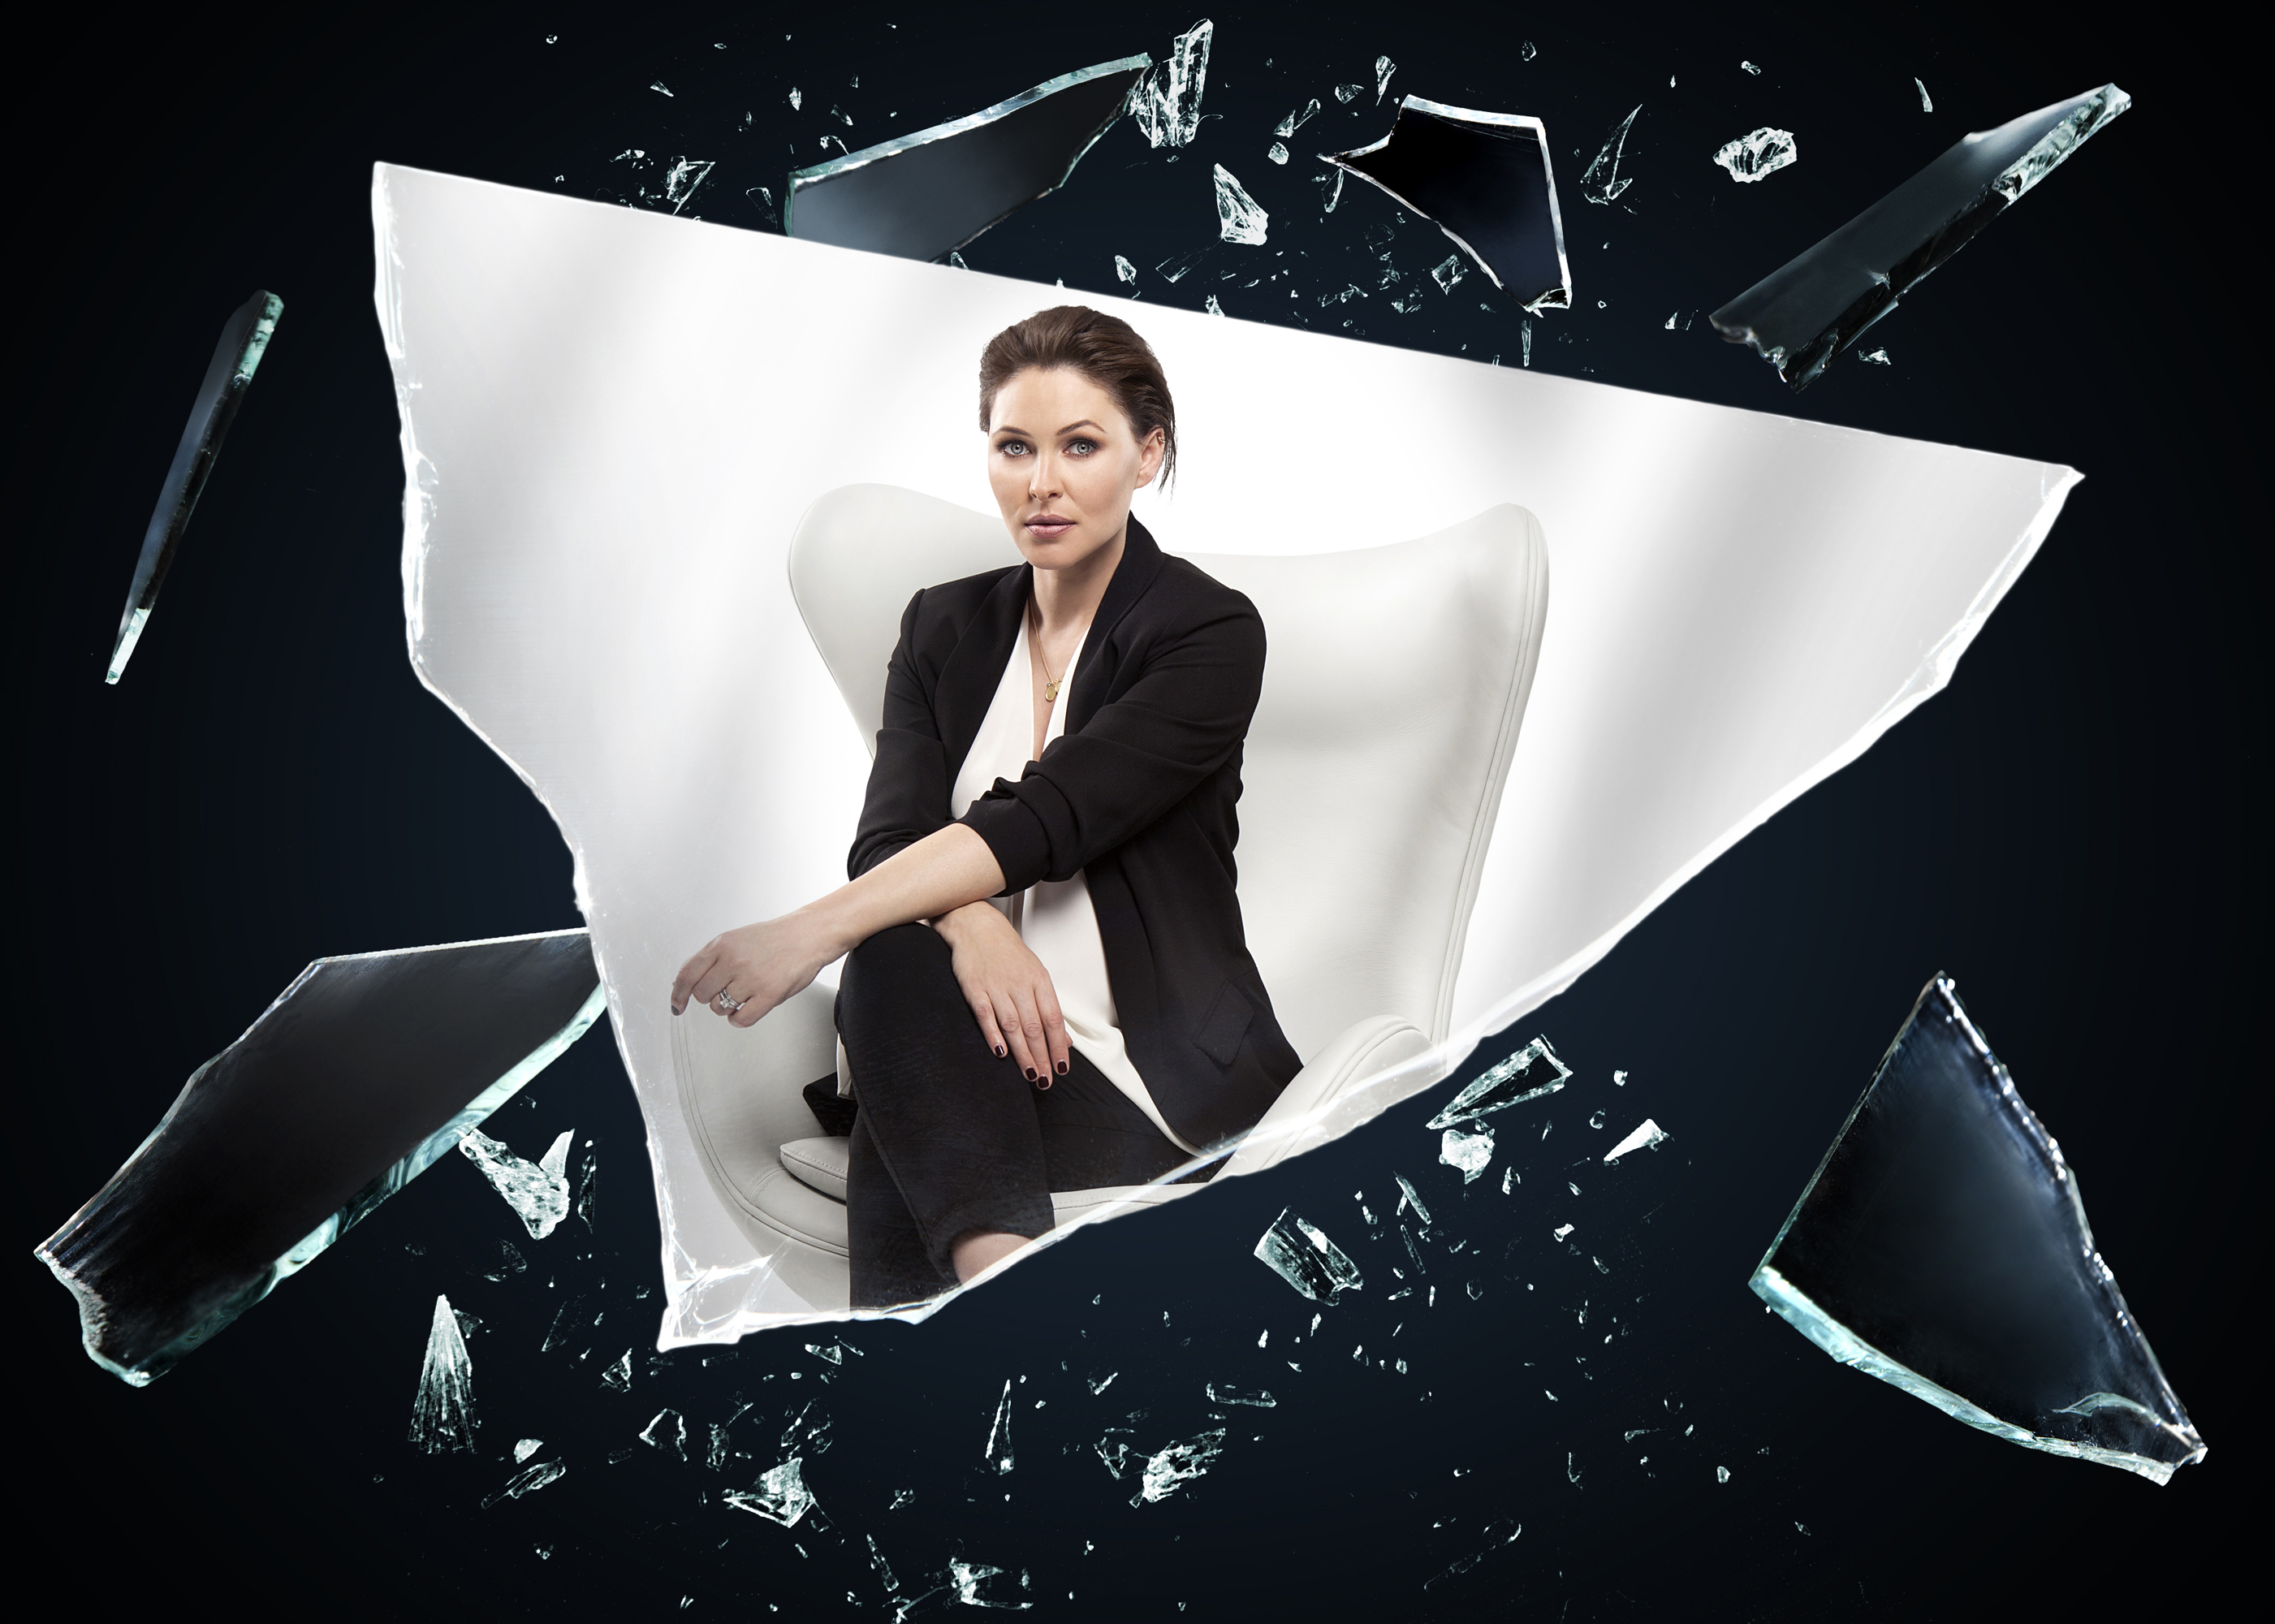 Day -7: Emma Willis: “There are going to be some quite game changing twists”